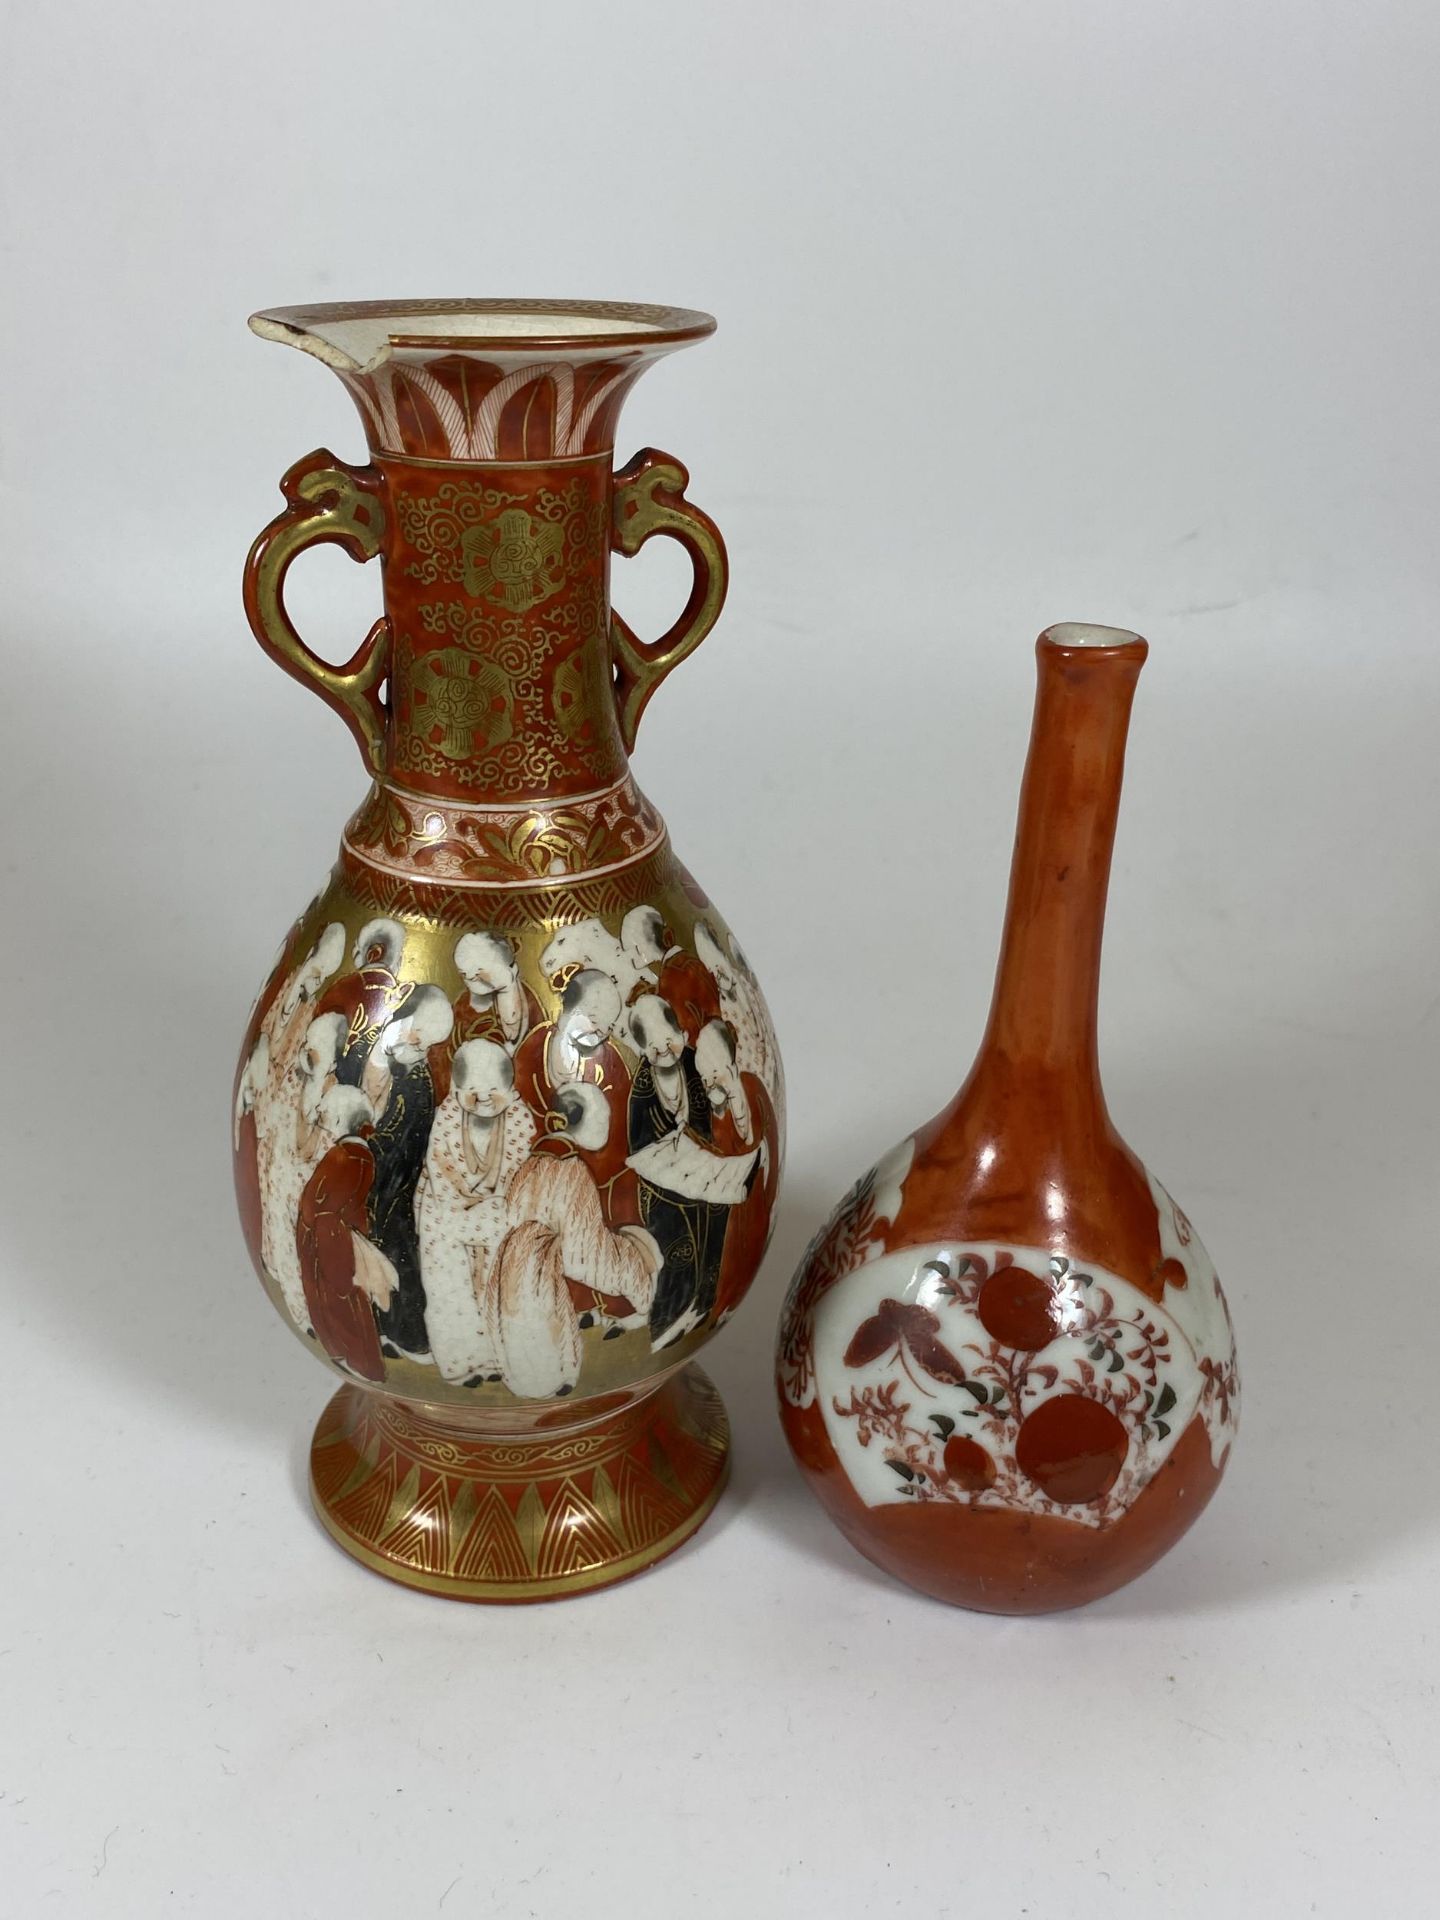 TWO JAPANESE KUTANI ITEMS - TWIN HANDLED VASE WITH SCHOLARS DESIGN AND SMALLER BOTTLE SHAPED - Image 3 of 5